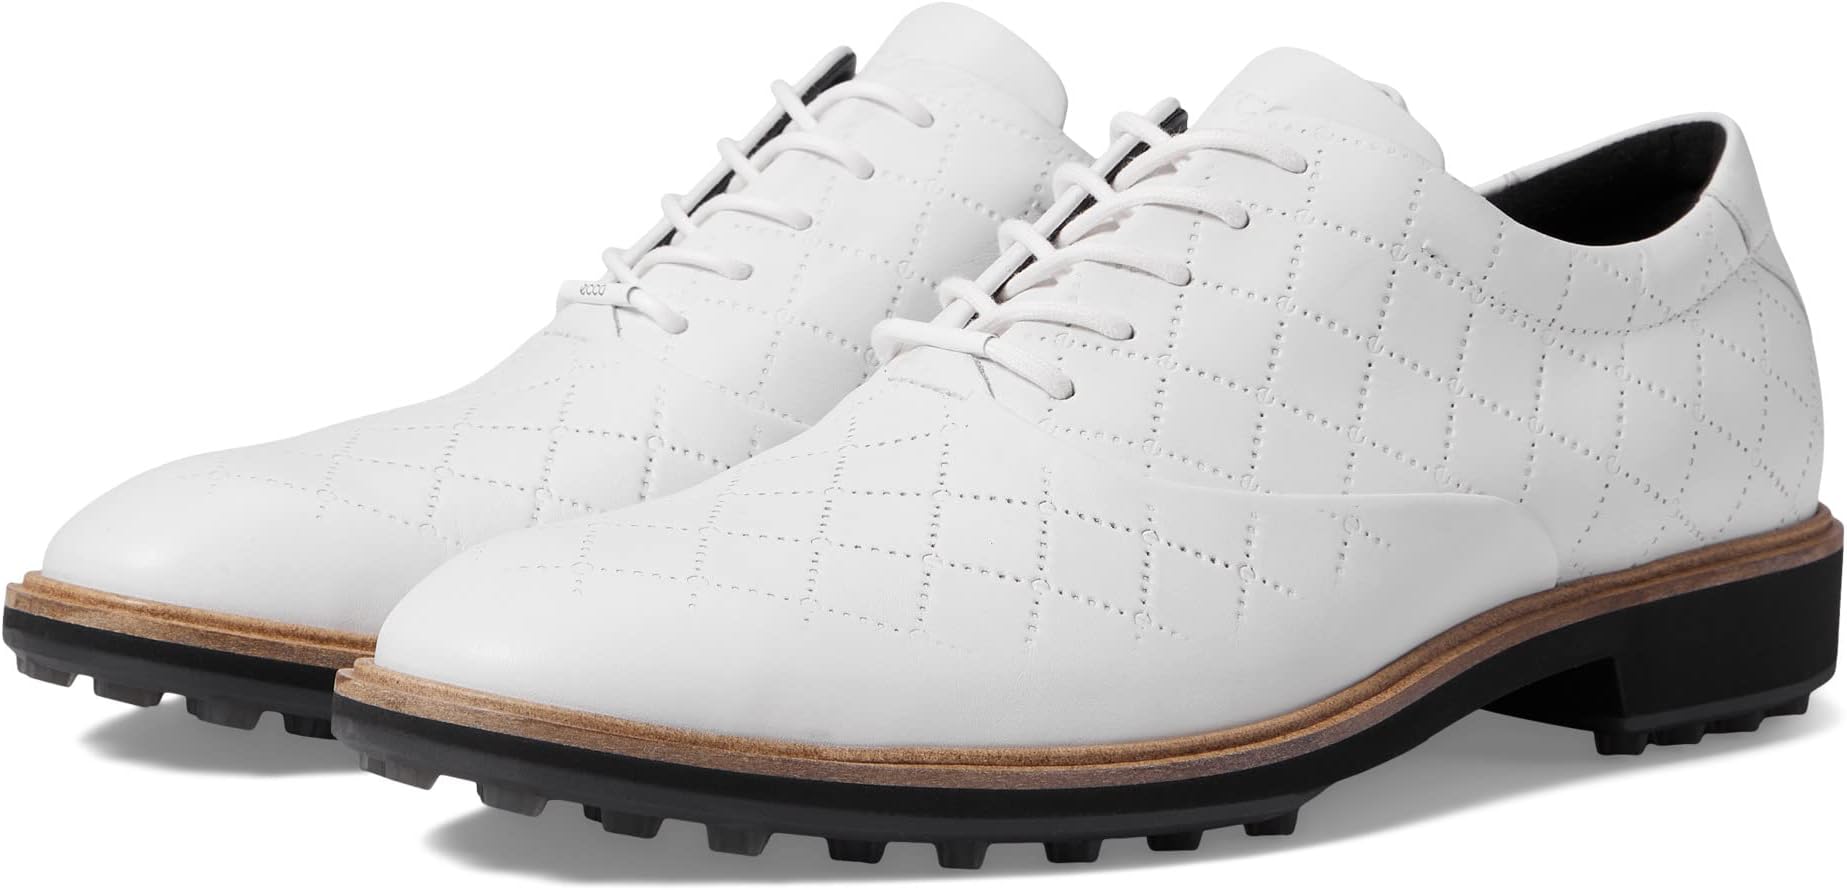 Кроссовки Classic Hybrid Hydromax Golf Shoes ECCO, цвет White Cow Leather careaymade genuine leather women s shoes art style cow tendon sole single toe layer cow leather hand and ankle short boots